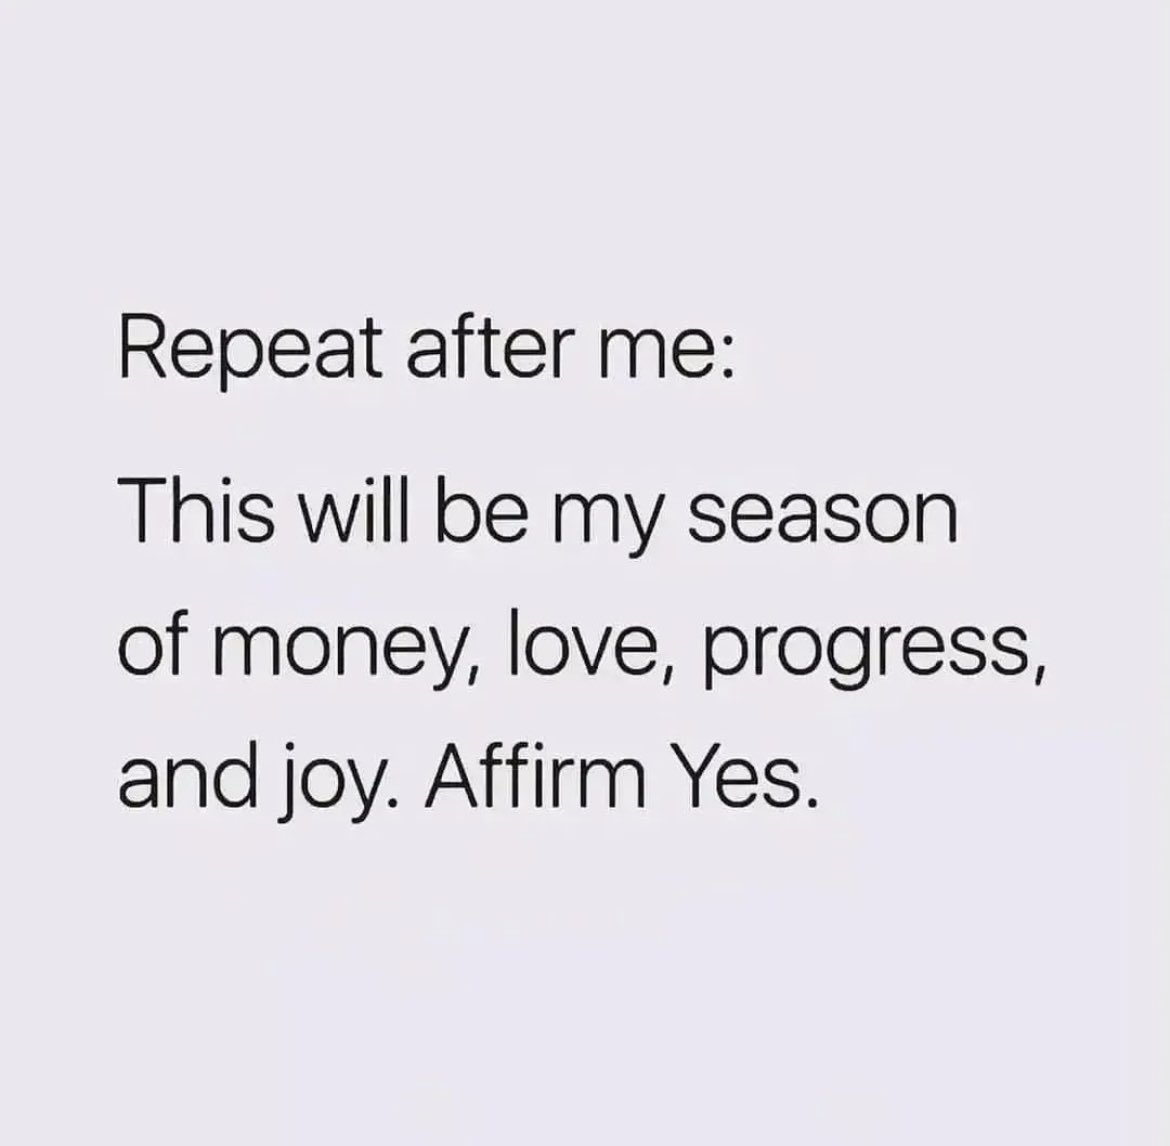 Type ‘YES’ to Affirm.